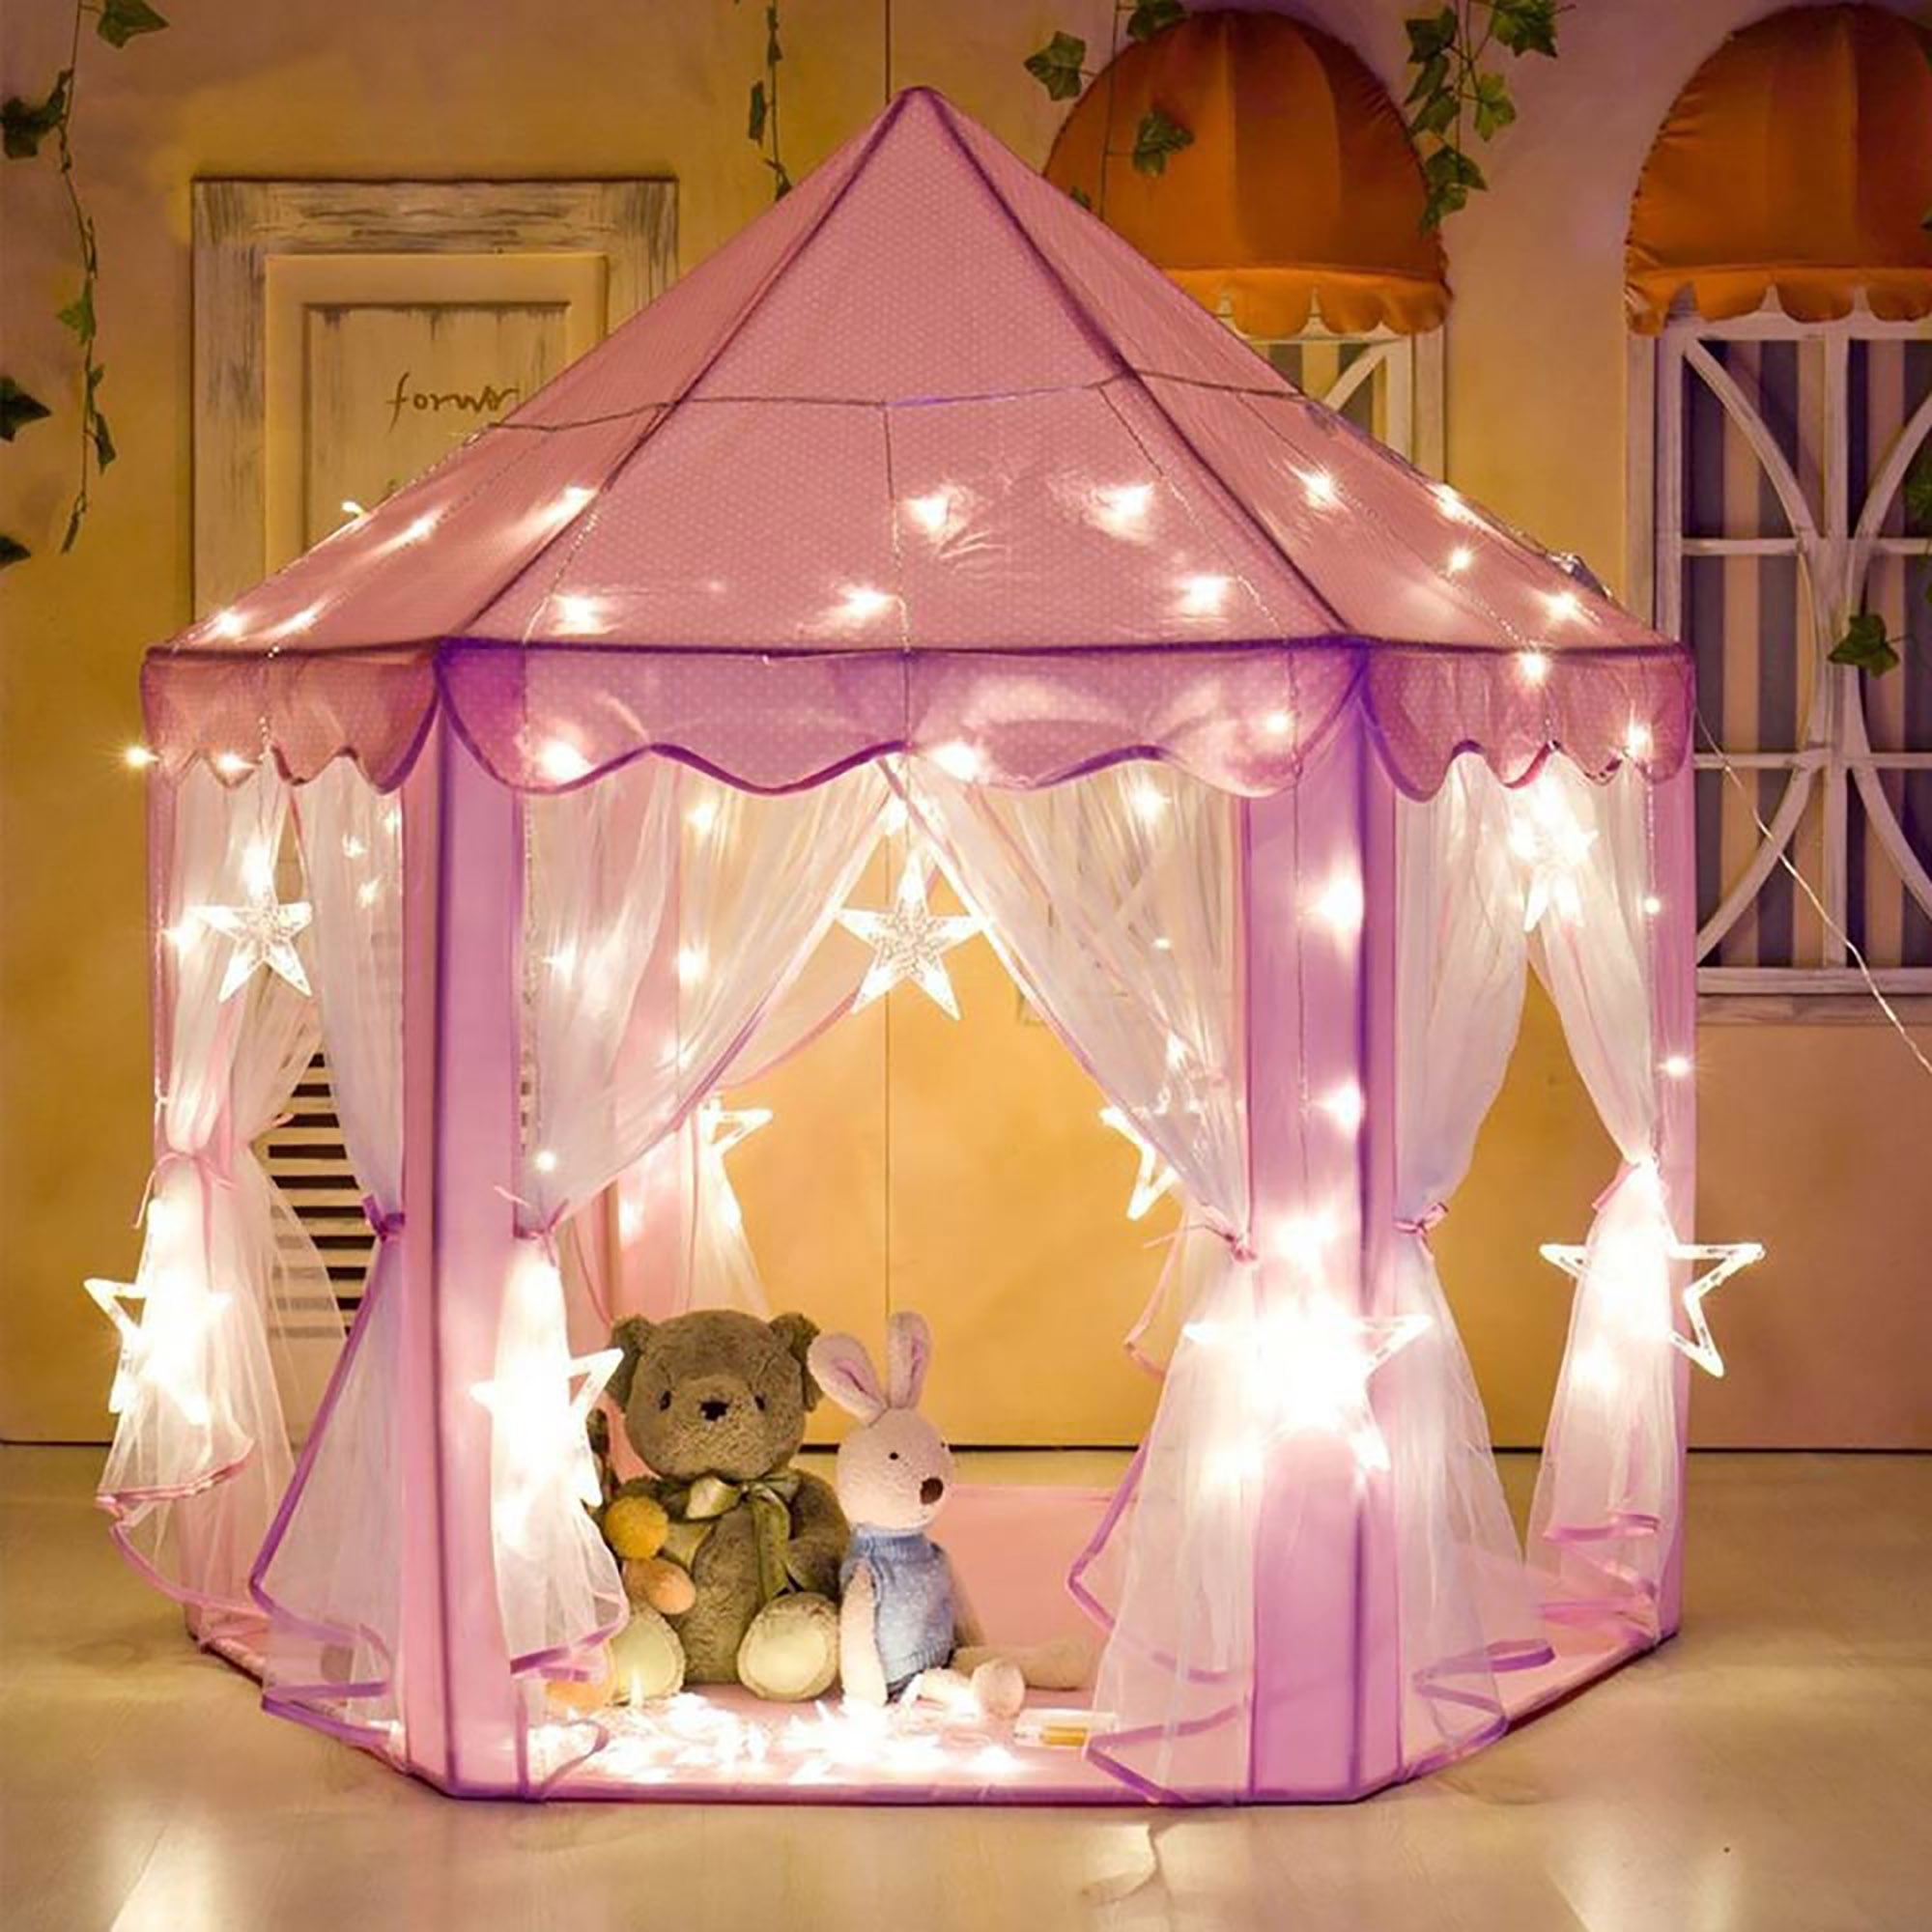 Pink Kids Indoor Princess Castle Play Tents,Sanmersen Outdoor Portable Large Playhouse with LED Star Lights,Perfect Indoor Toys Gift for Child Toddlers